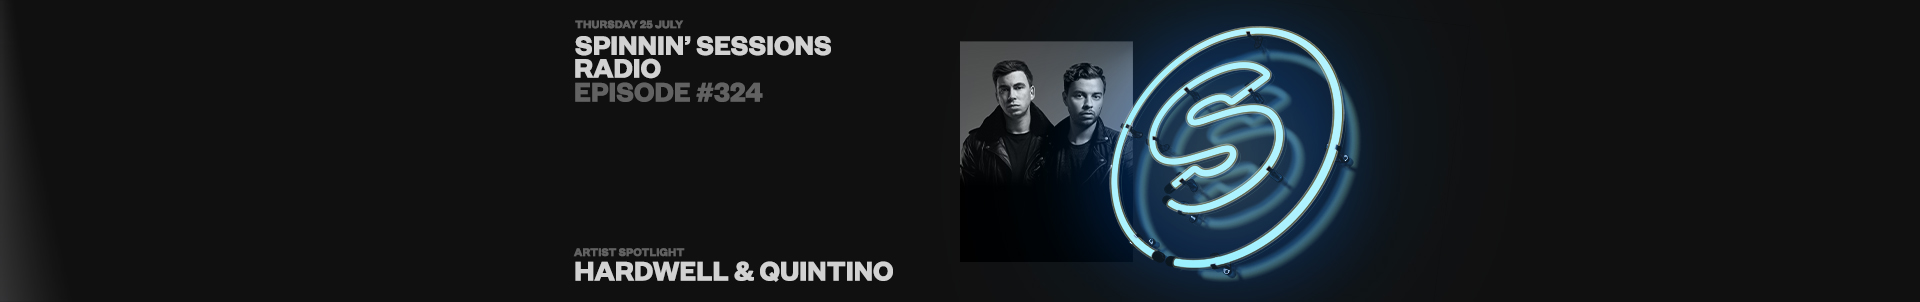 New music on the Spinnin' Sessions radio show feat. Hardwell & Quintino